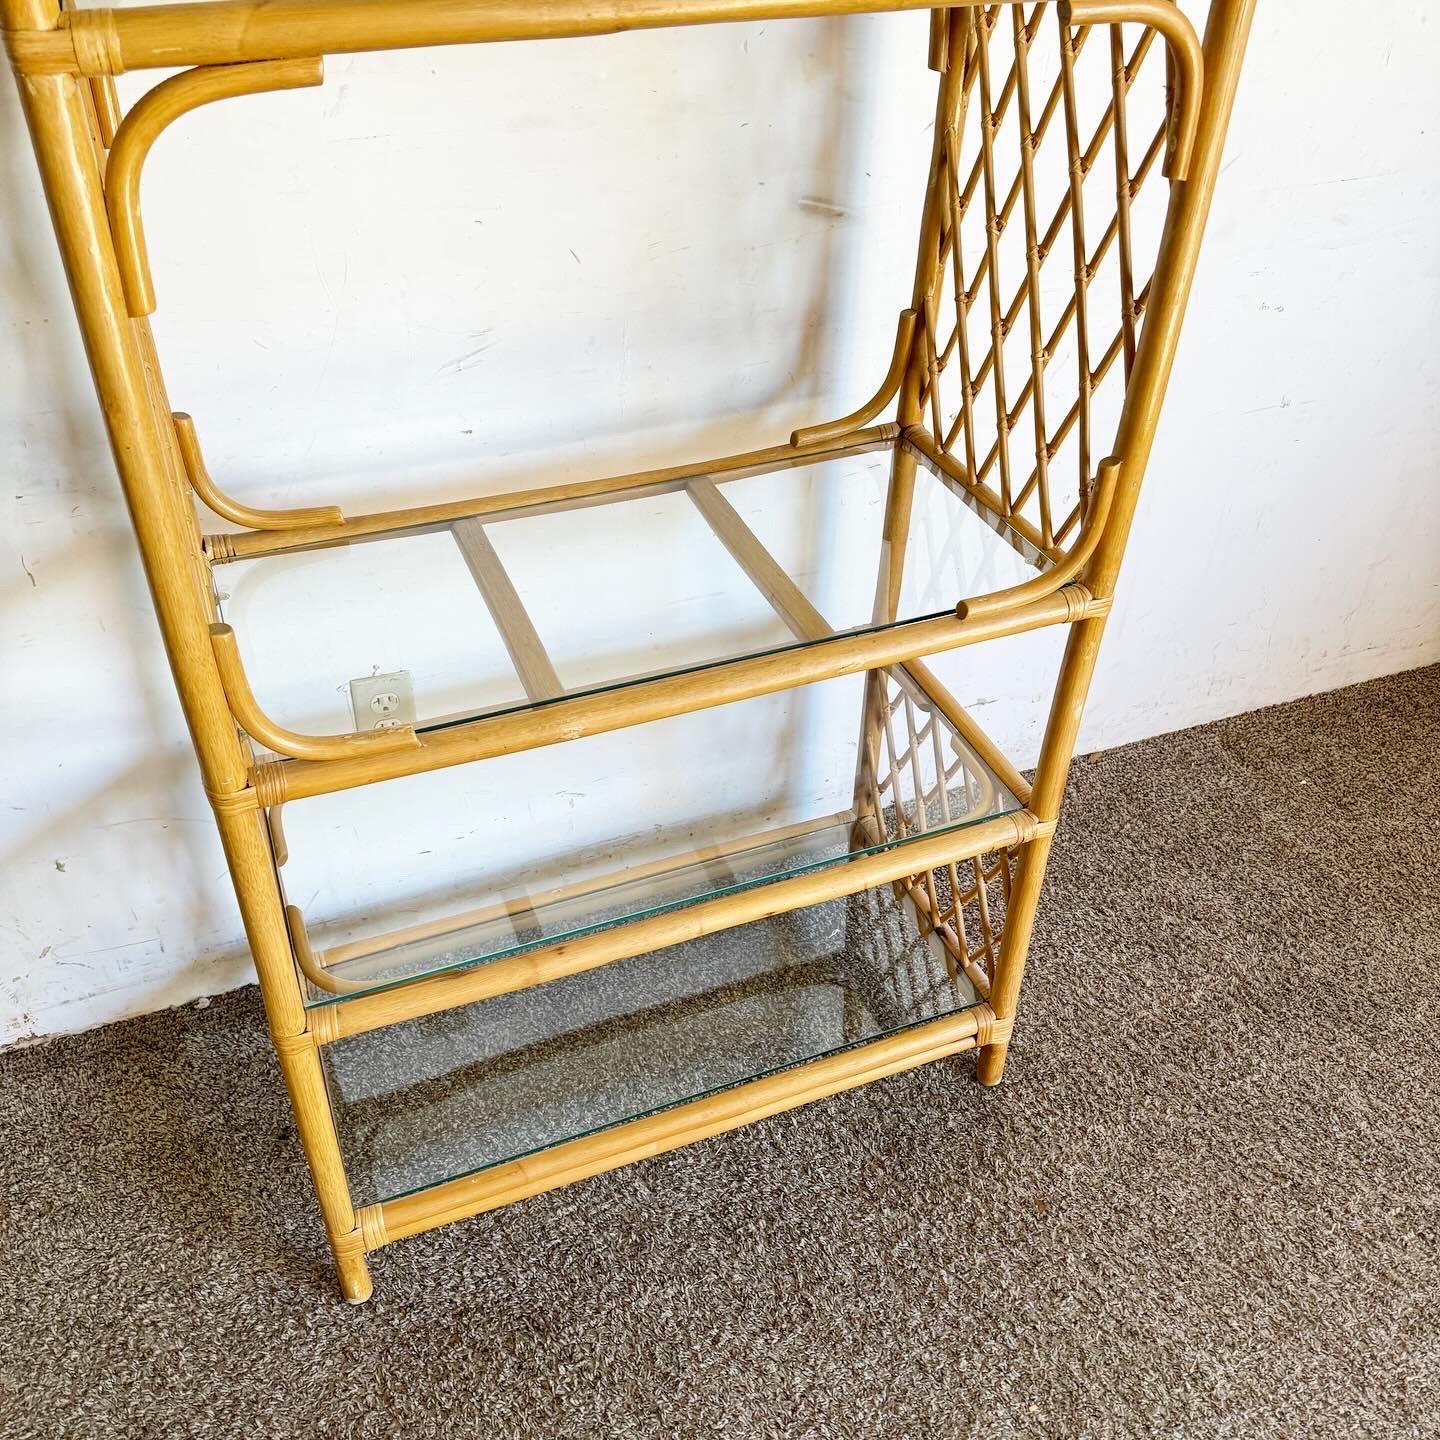 Late 20th Century Boho Chic Arched Bamboo Rattan Etagere - 5 Shelves For Sale